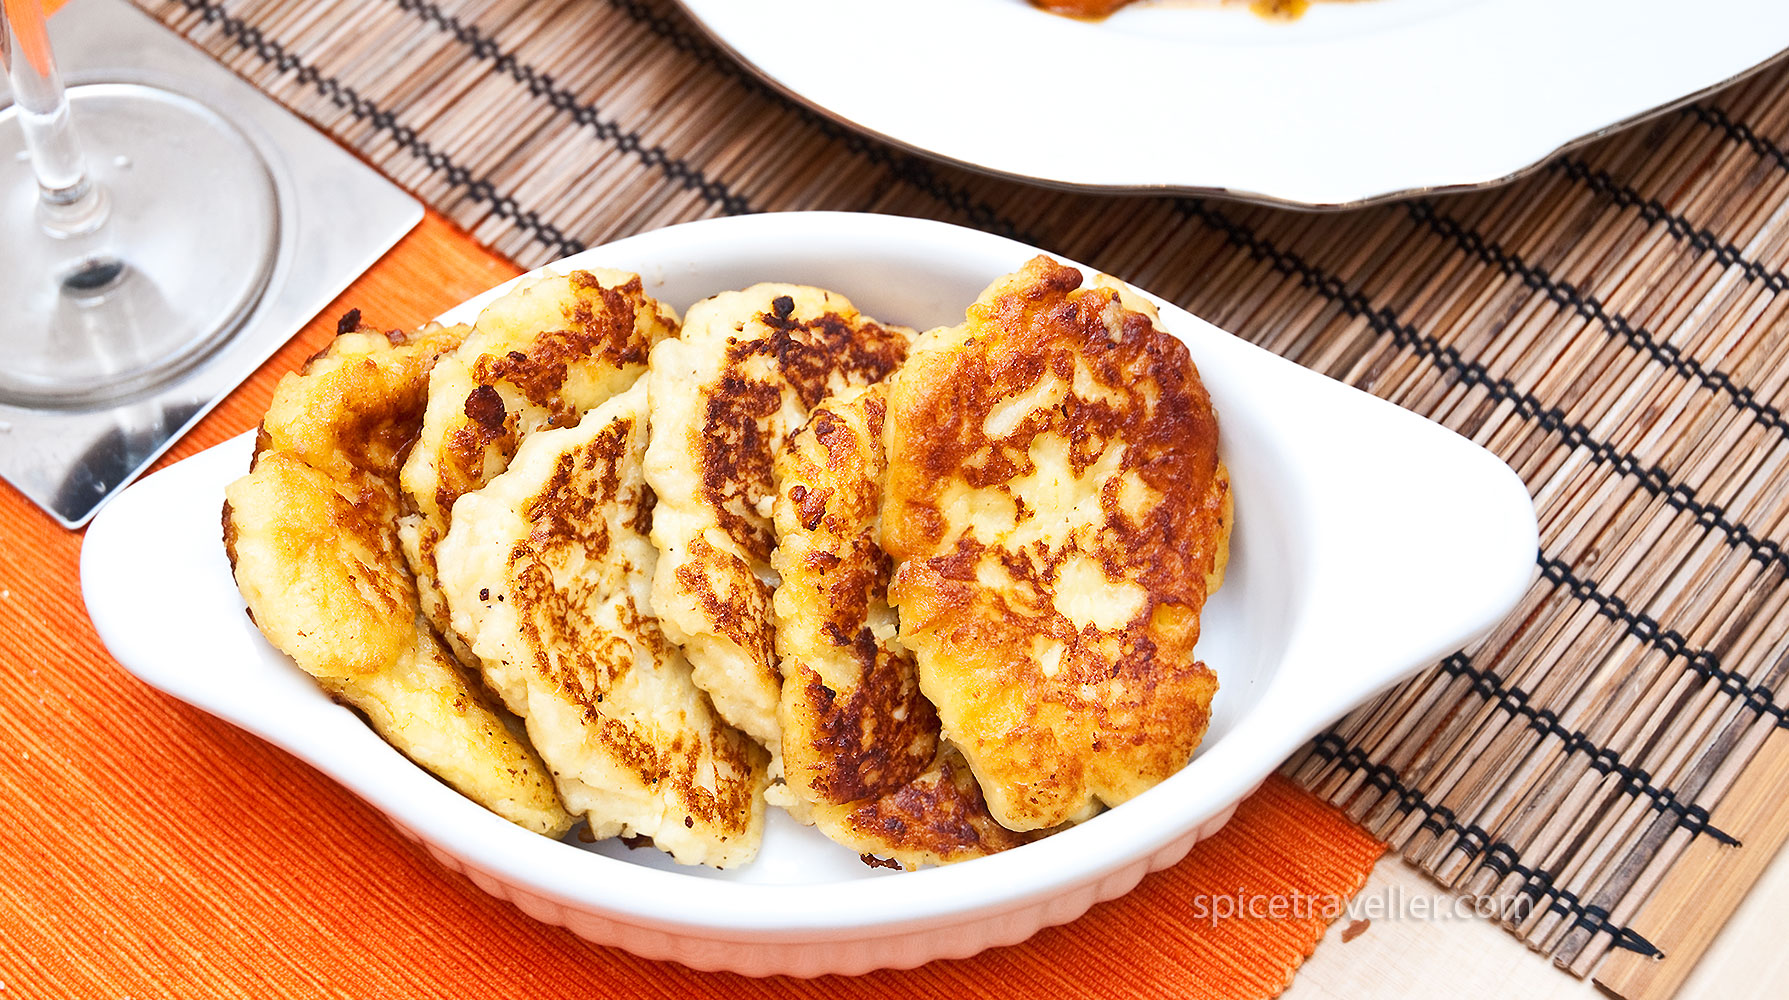 Irresistible Irish Potato Bread Cakes, neatly arranged in a small dish, showcasing their golden brown exterior and inviting texture